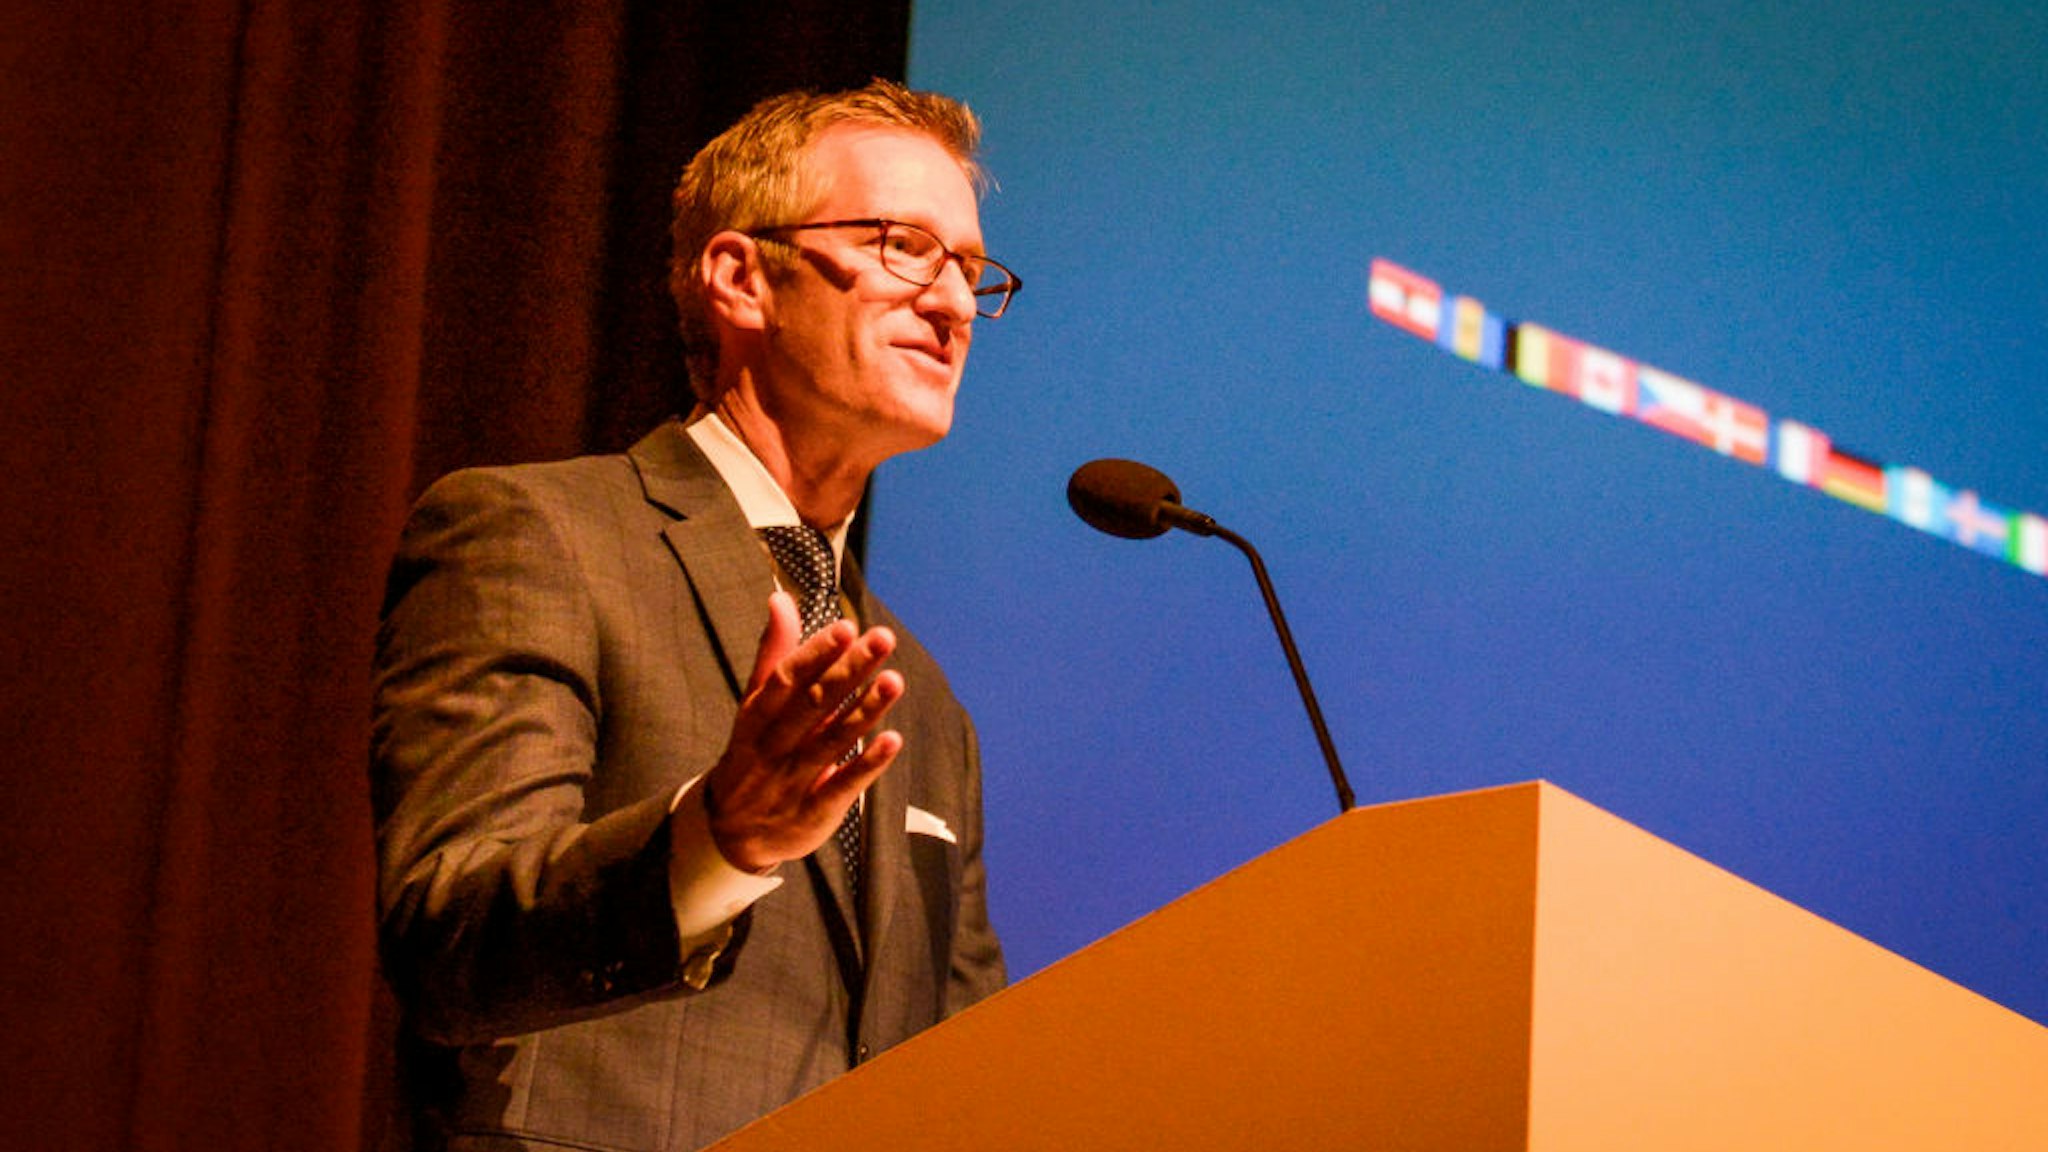 Portland, Oregon Mayor Ted Wheeler speaks at a trade event in Portland, Oregon, United States on 16th May, 2018.